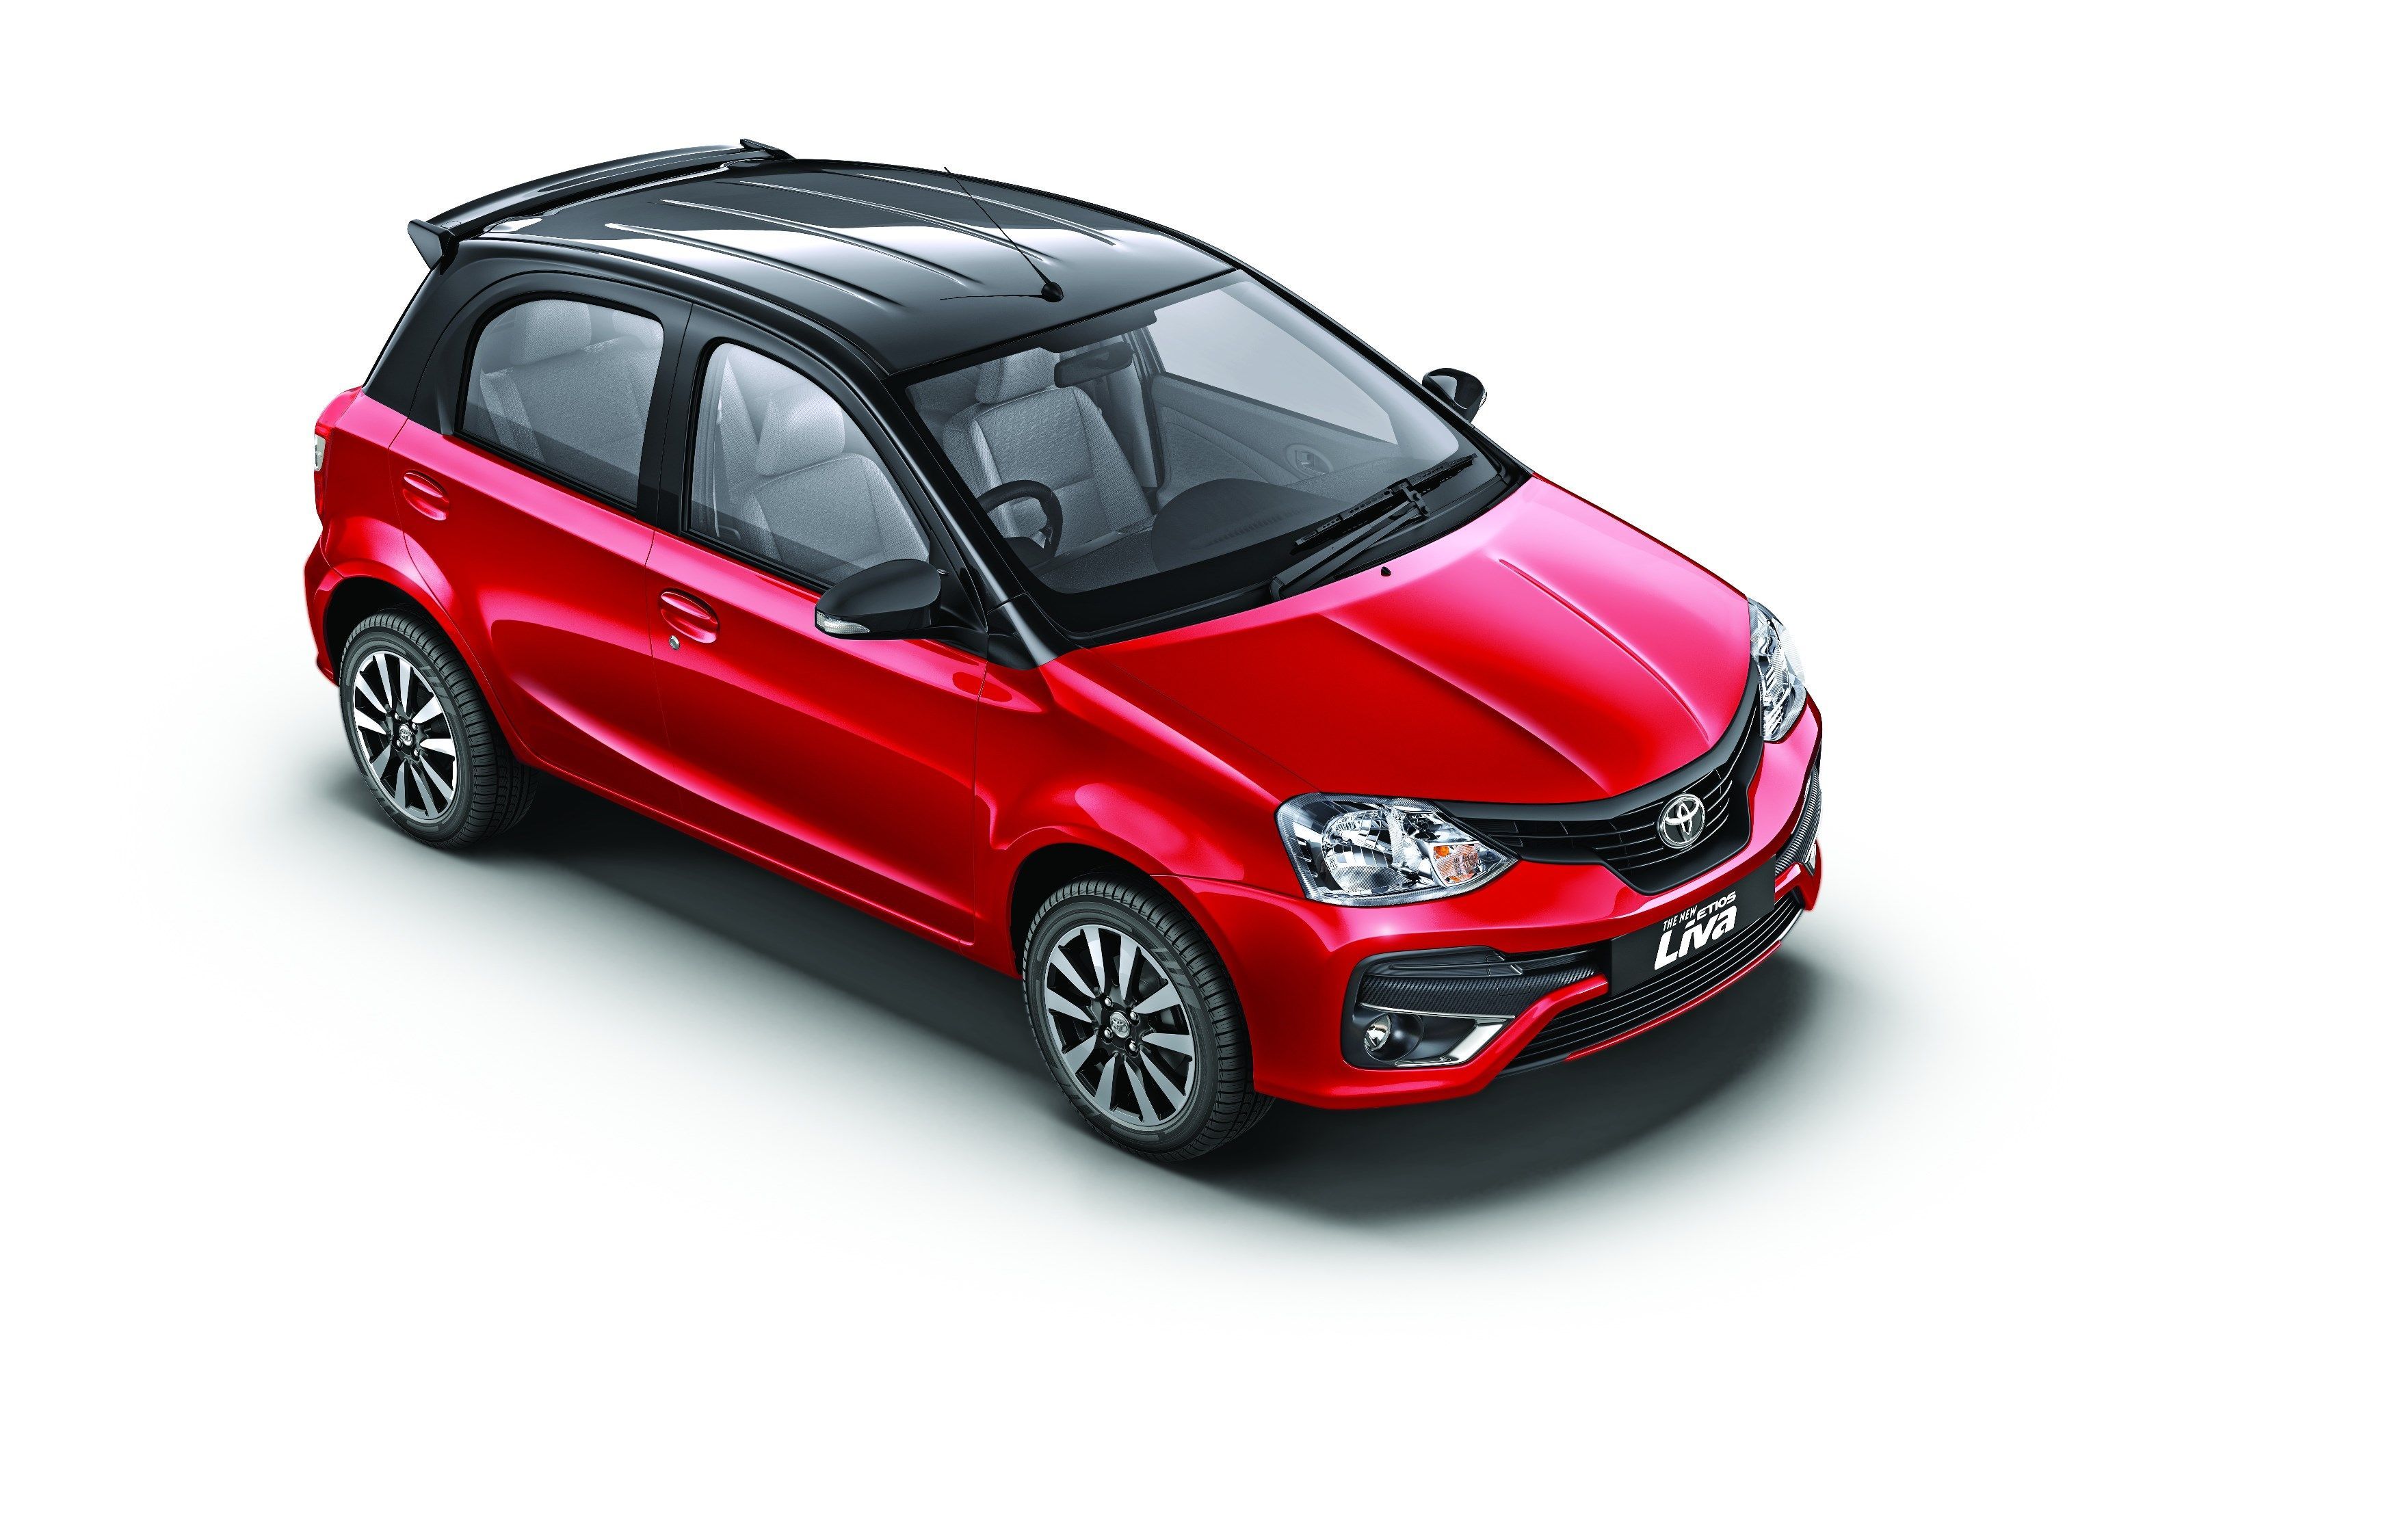 Toyota Etios Liva Goes Stylish, Now Comes With Dual Shades